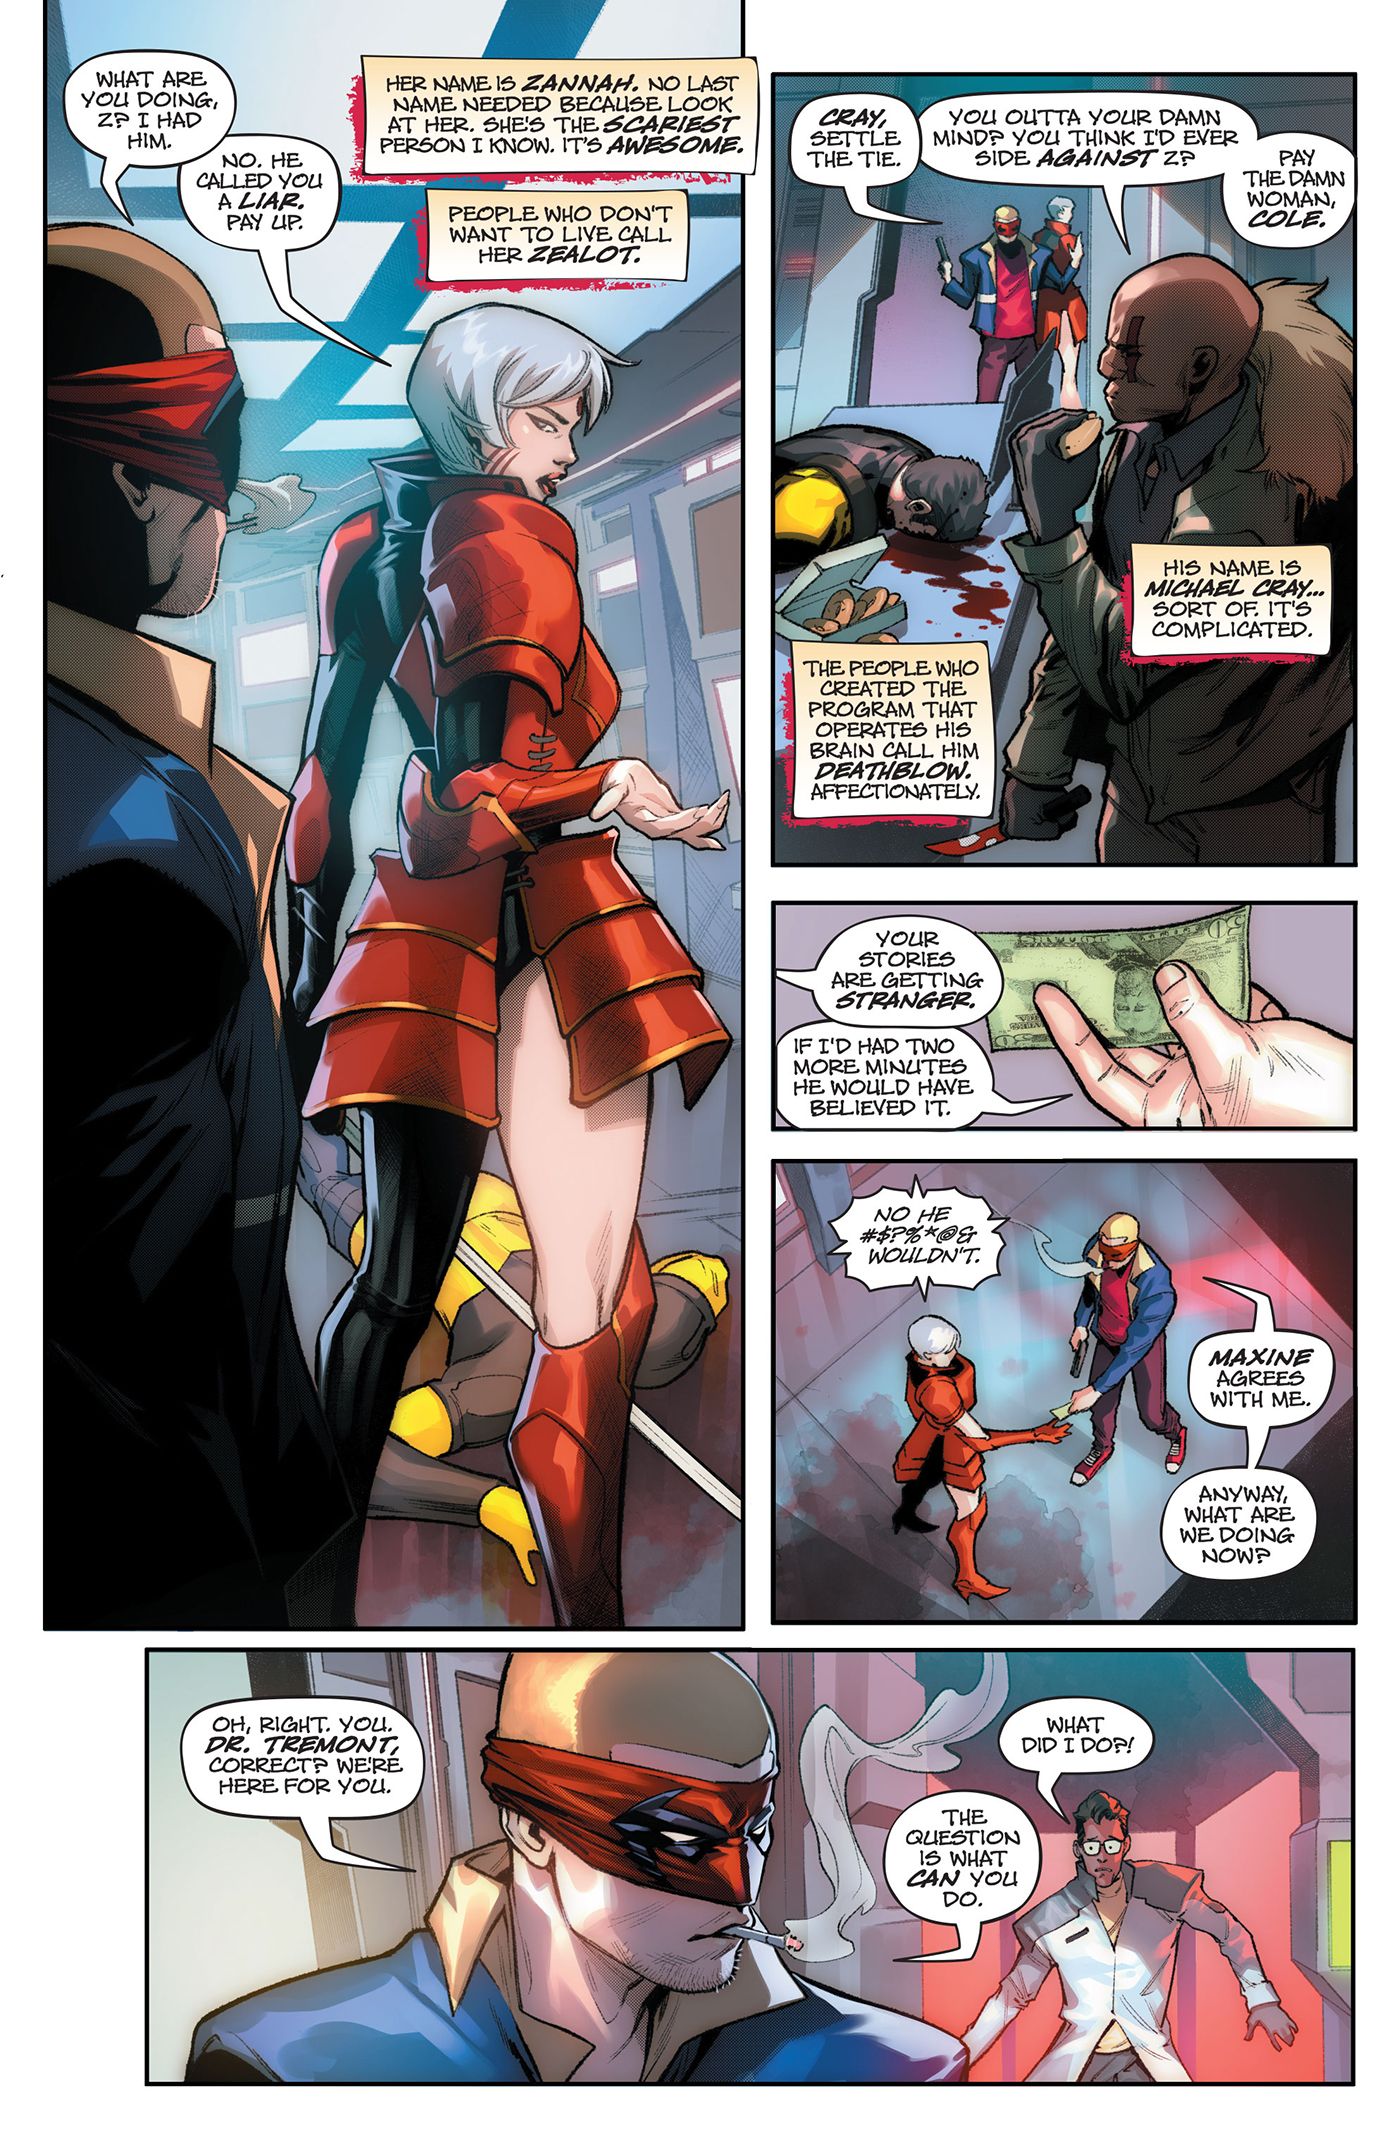 WildCATS_1_preview_3